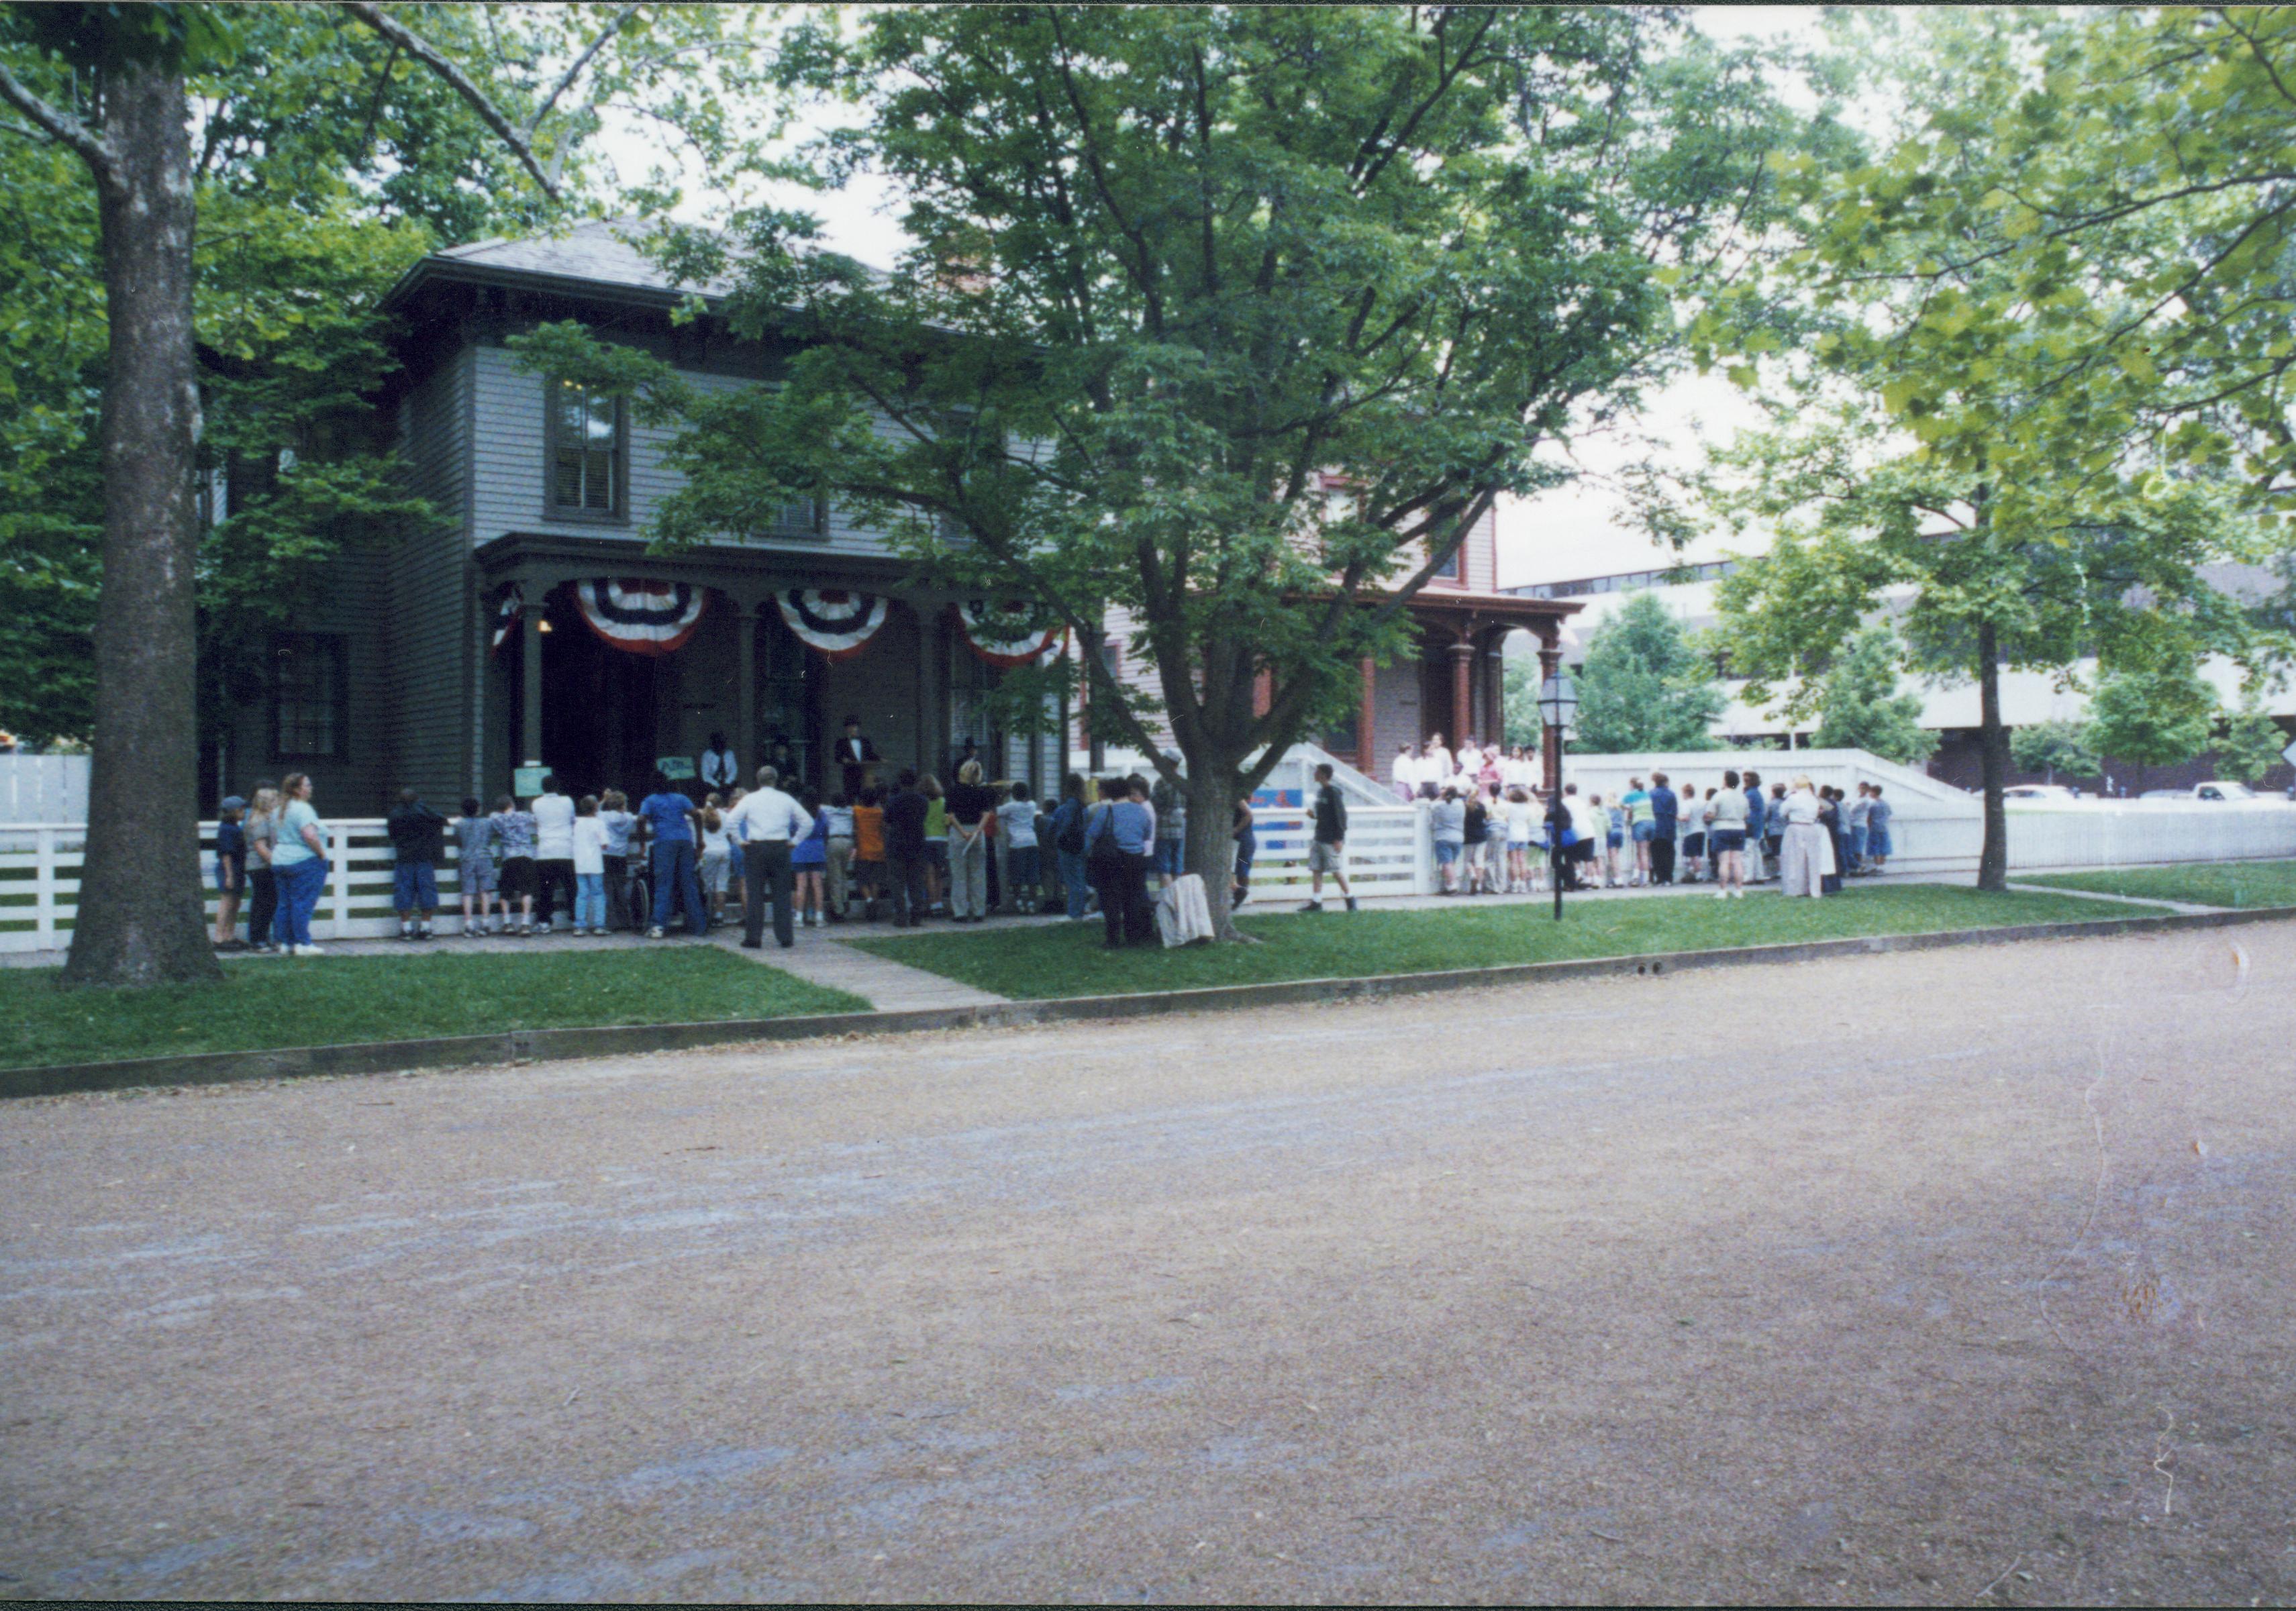 Iles School Living History program - Lincoln-Douglas debates performed by students on Lyon House. Education in the 1800s performed by students at the Beedle House on right.  School groups watch performances from 8th Street boardwalks.  Looking Northwest from 8th Street. Iles School, living history, Lincoln-Douglas debates, education, students, school groups